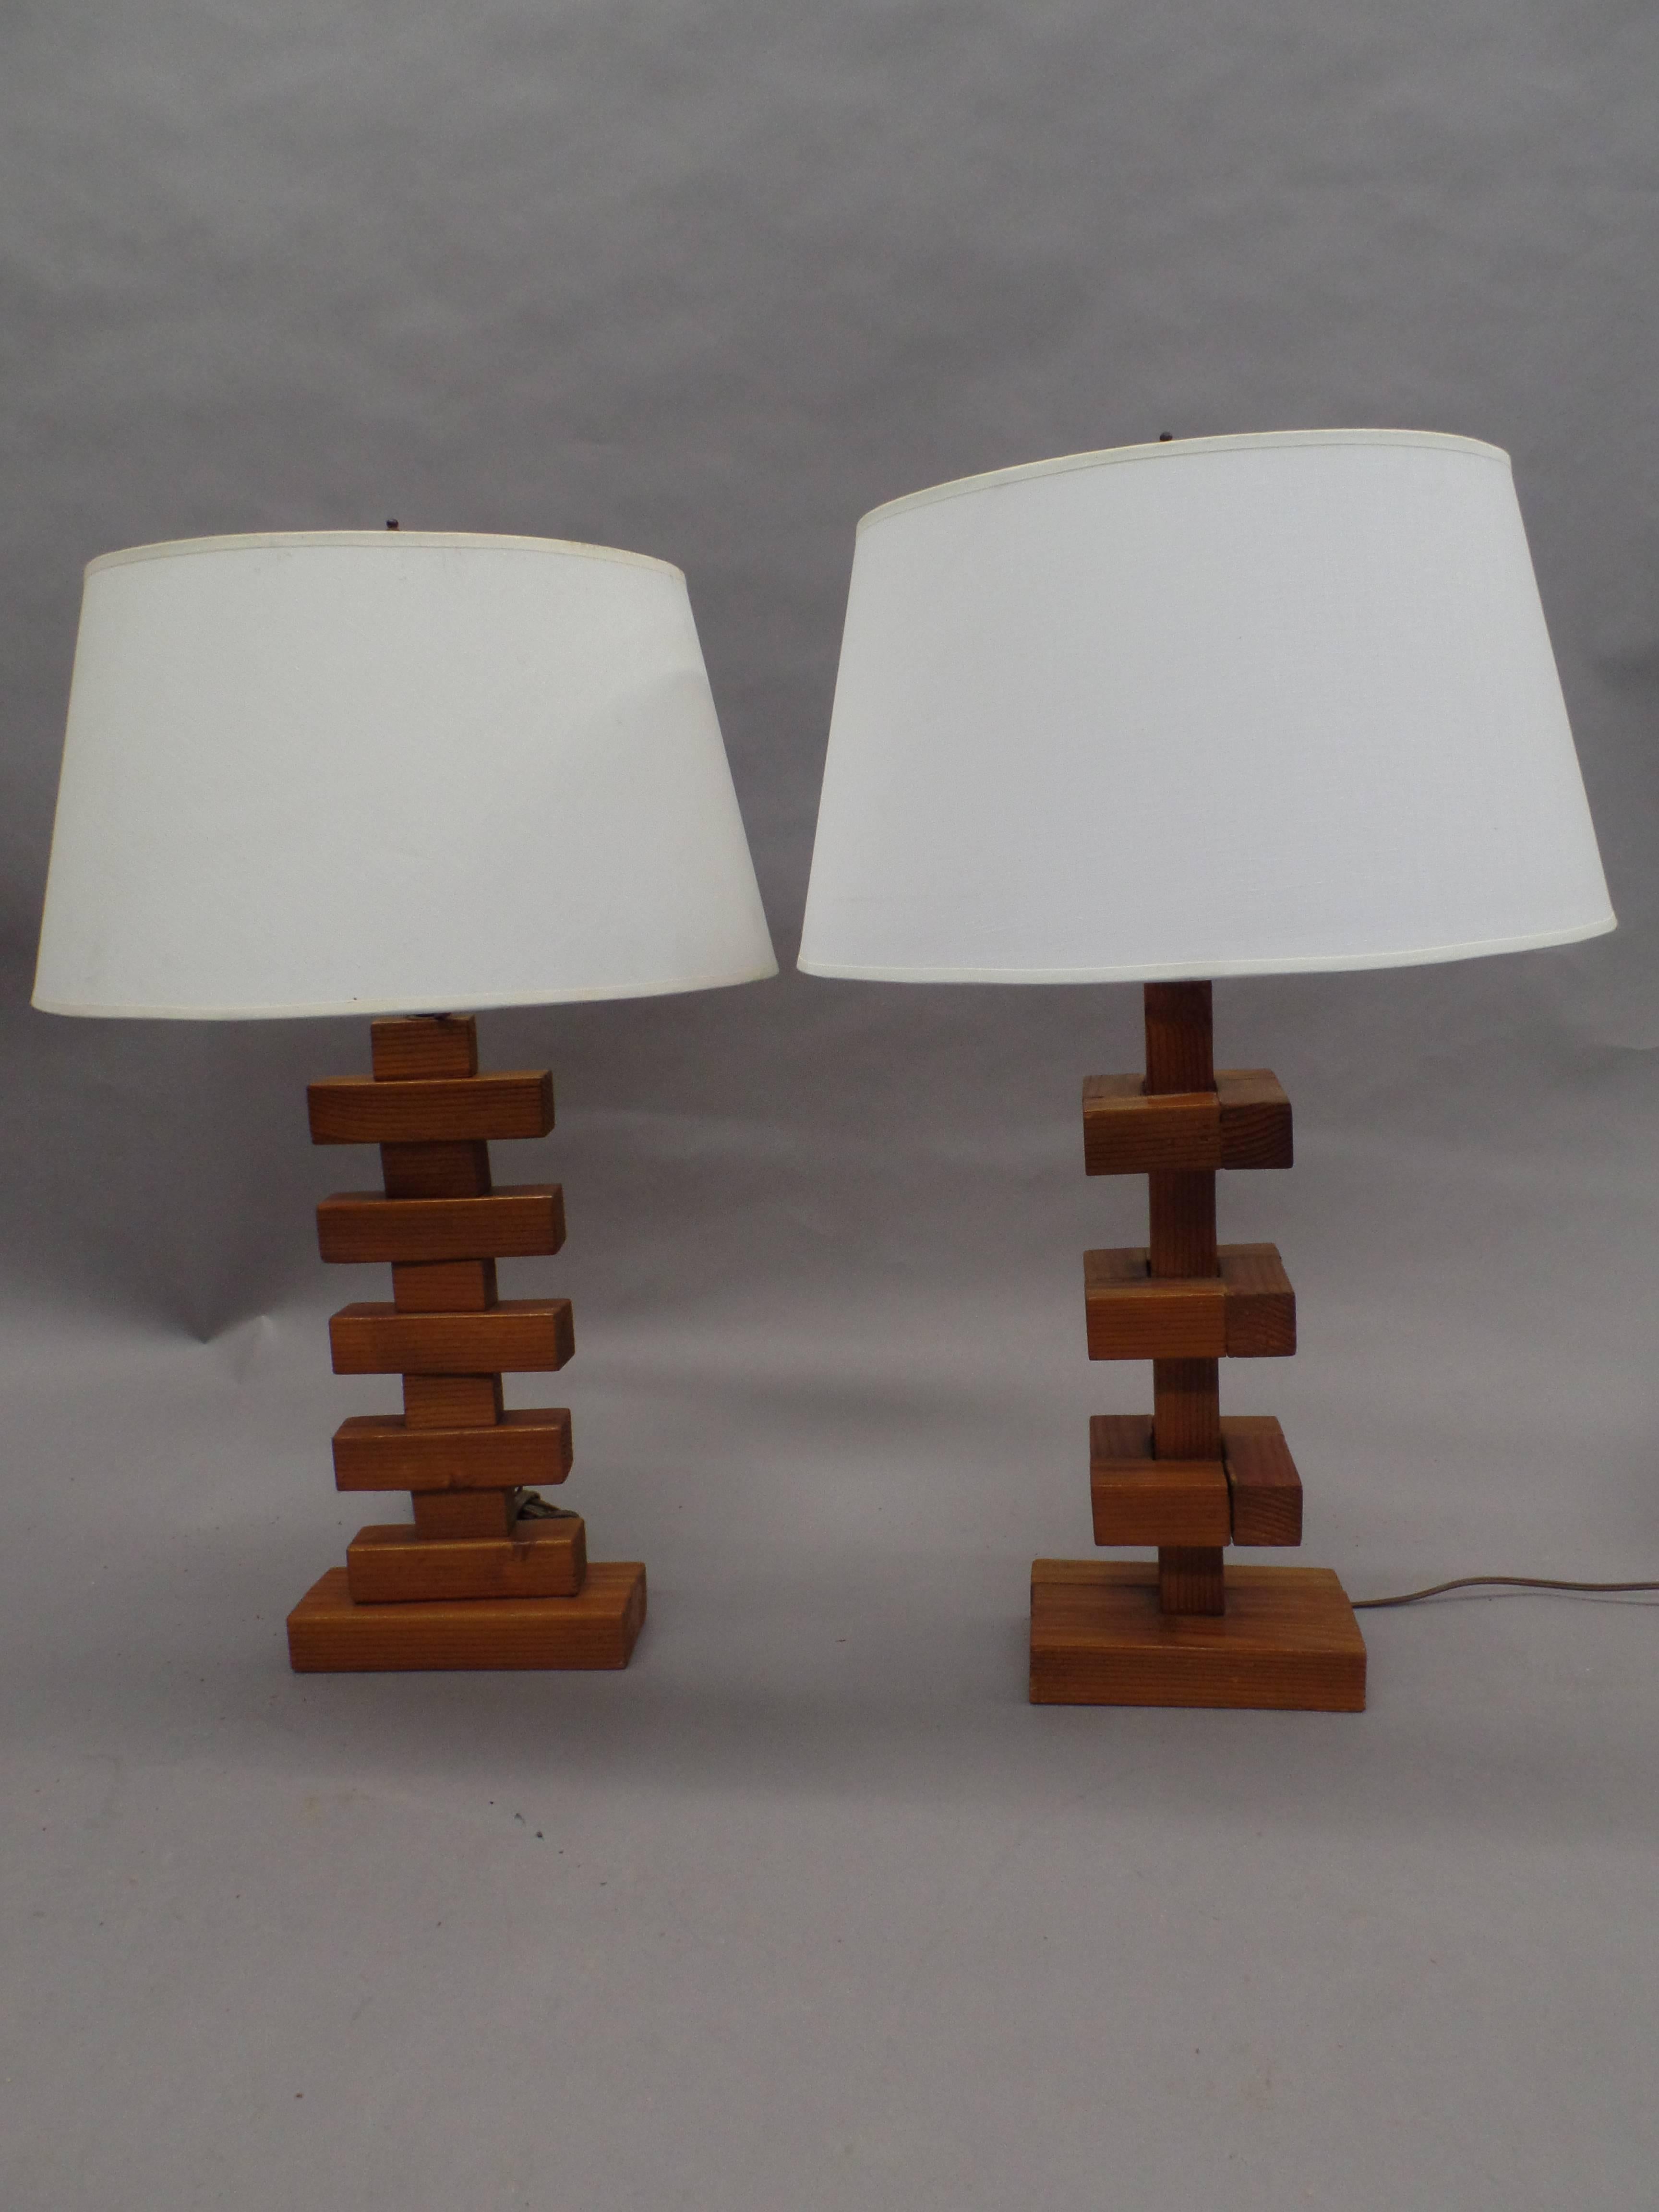 Rare pair of handmade Mid-Century wood table lamps with sculptural bases utilizing constructivist and cubist principles. Each lamp is different and complimentary to each other both rely on multiple intersecting planes to form dynamic compositions to